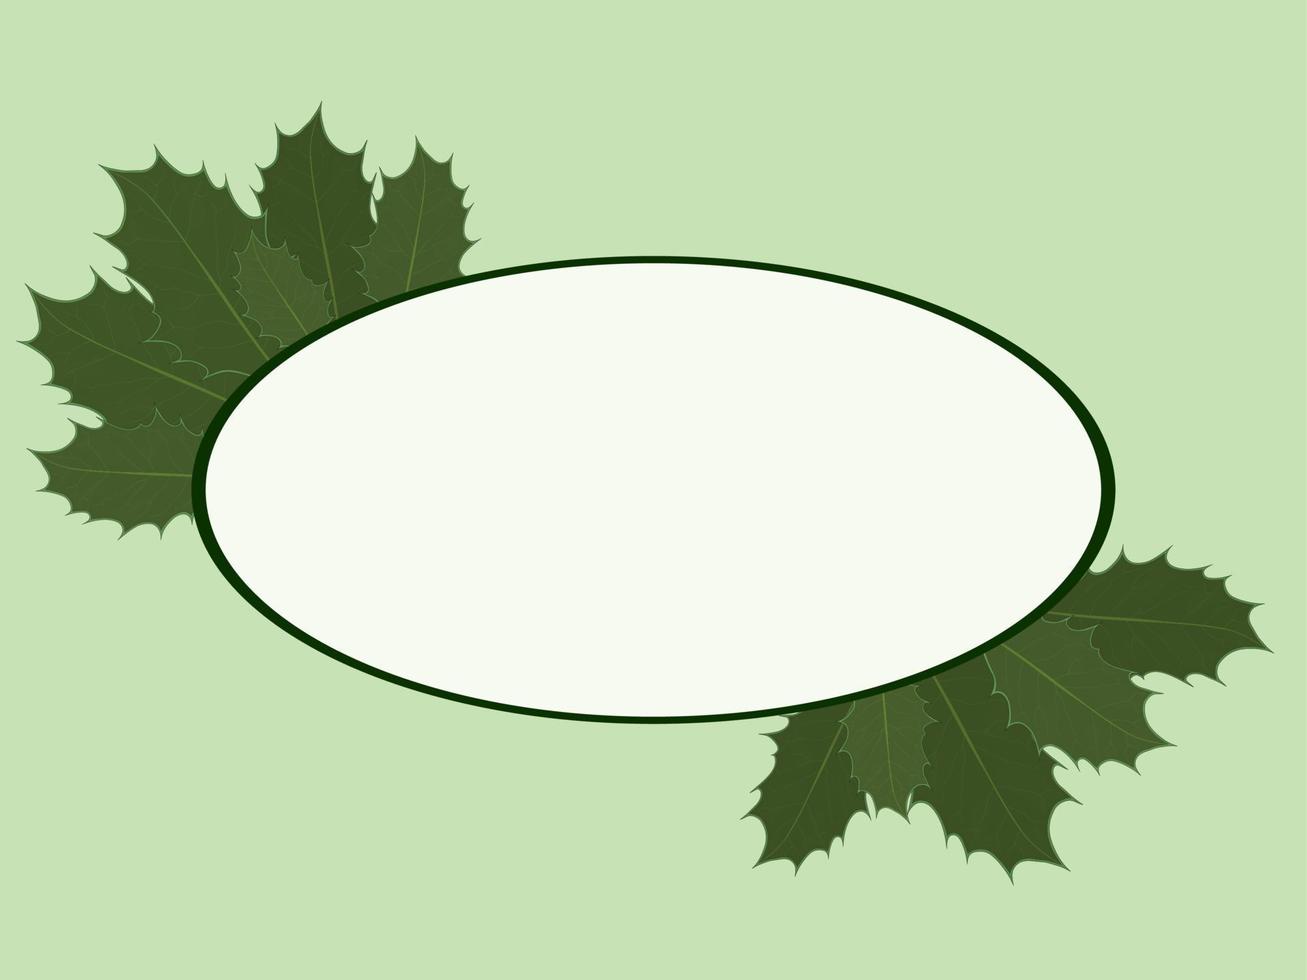 Light green background with oval frame and holly leaves vector illustration